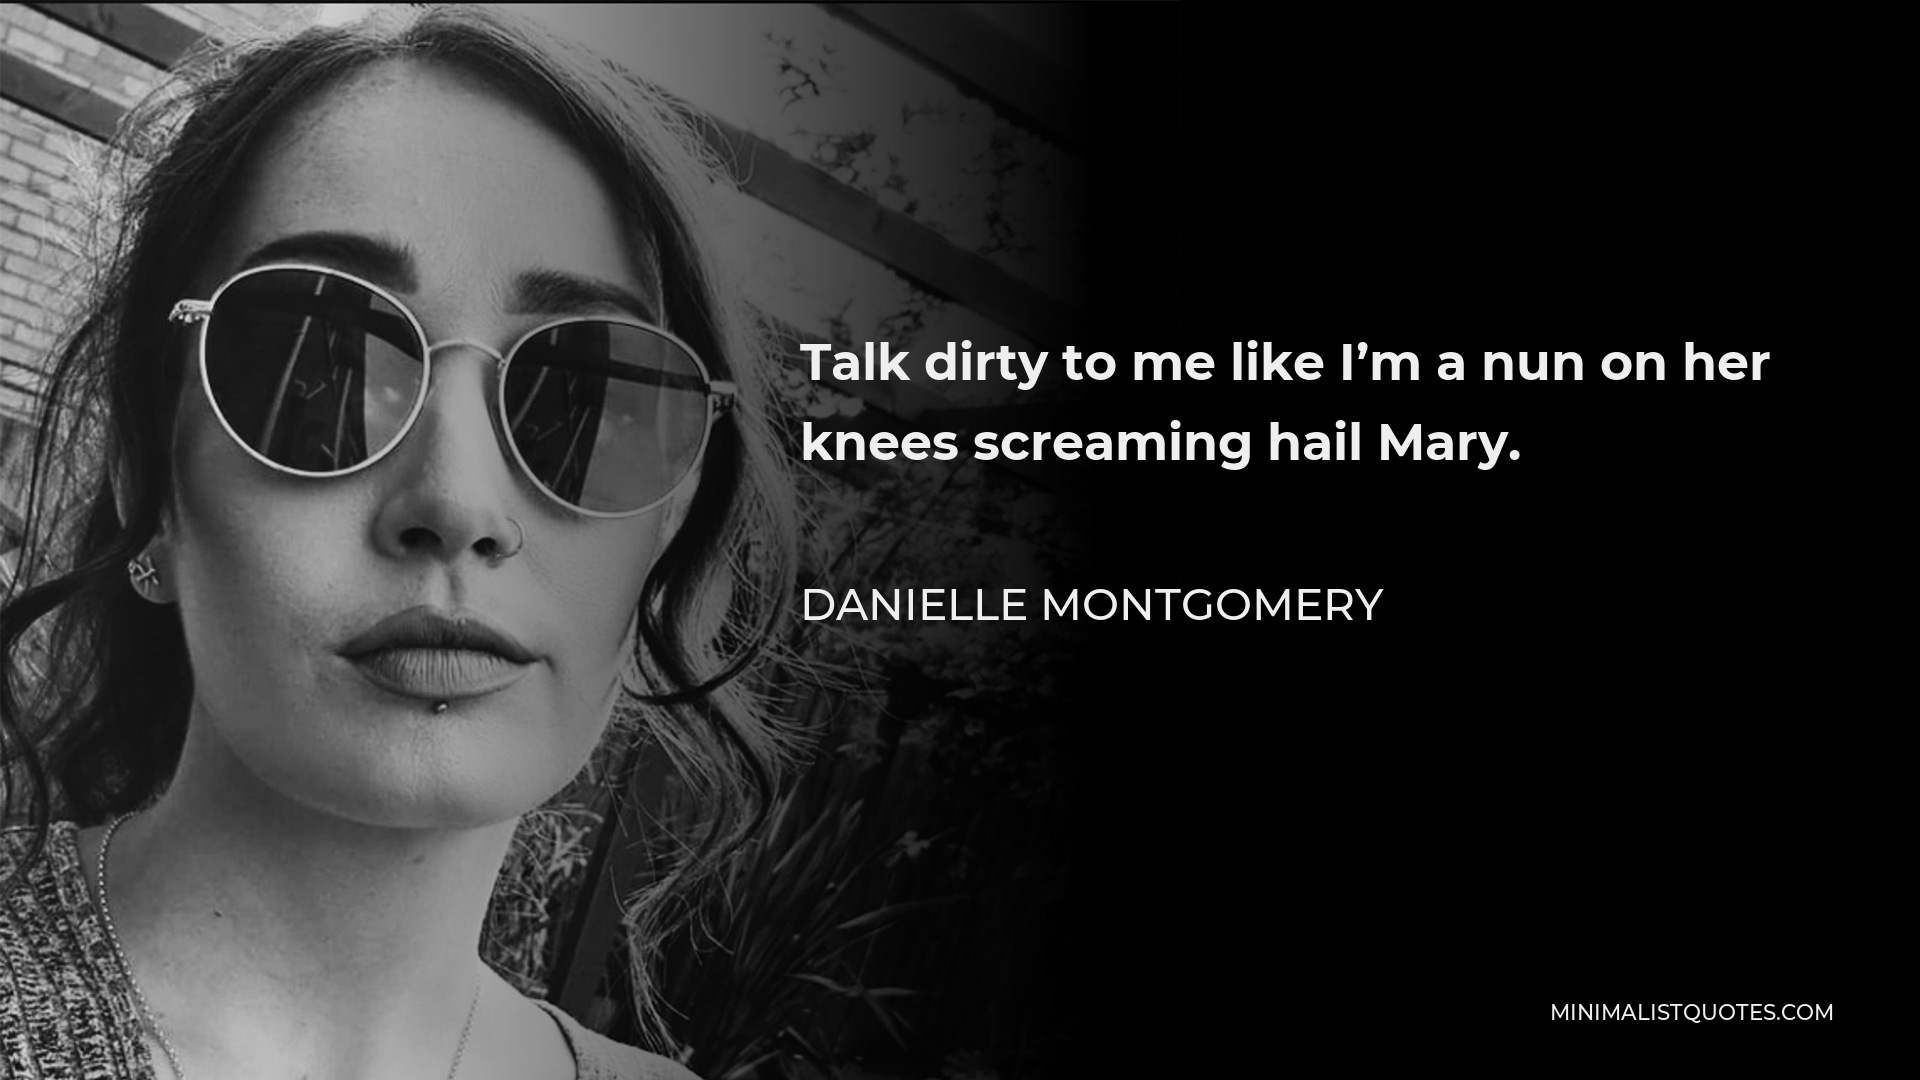 Danielle Montgomery Quote - Talk dirty to me like I’m a nun on her knees screaming hail Mary.